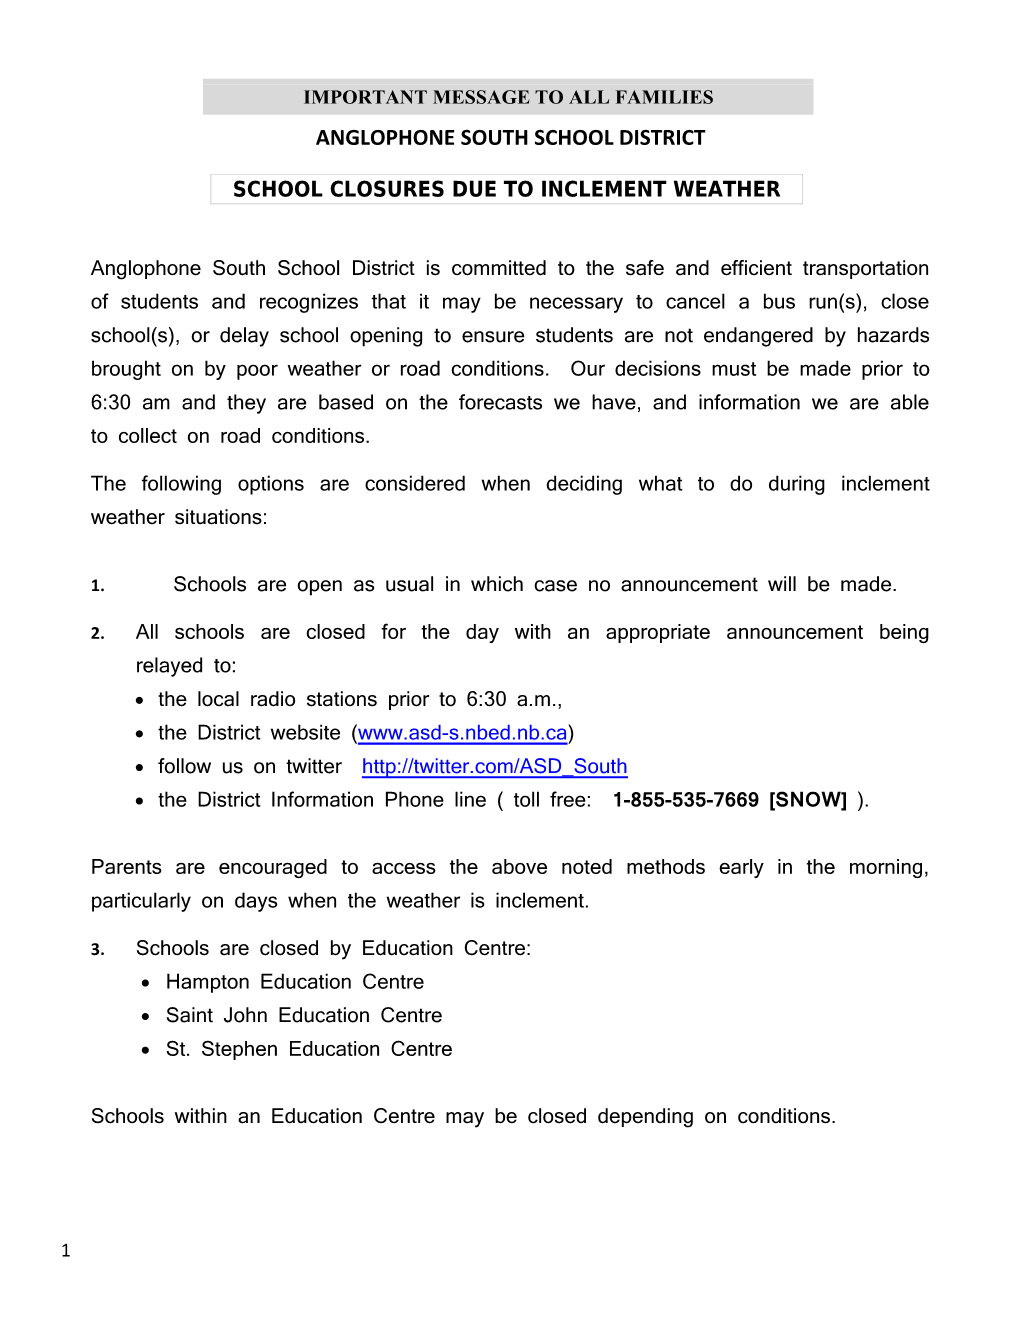 ASD-S Inclement Weather Policy